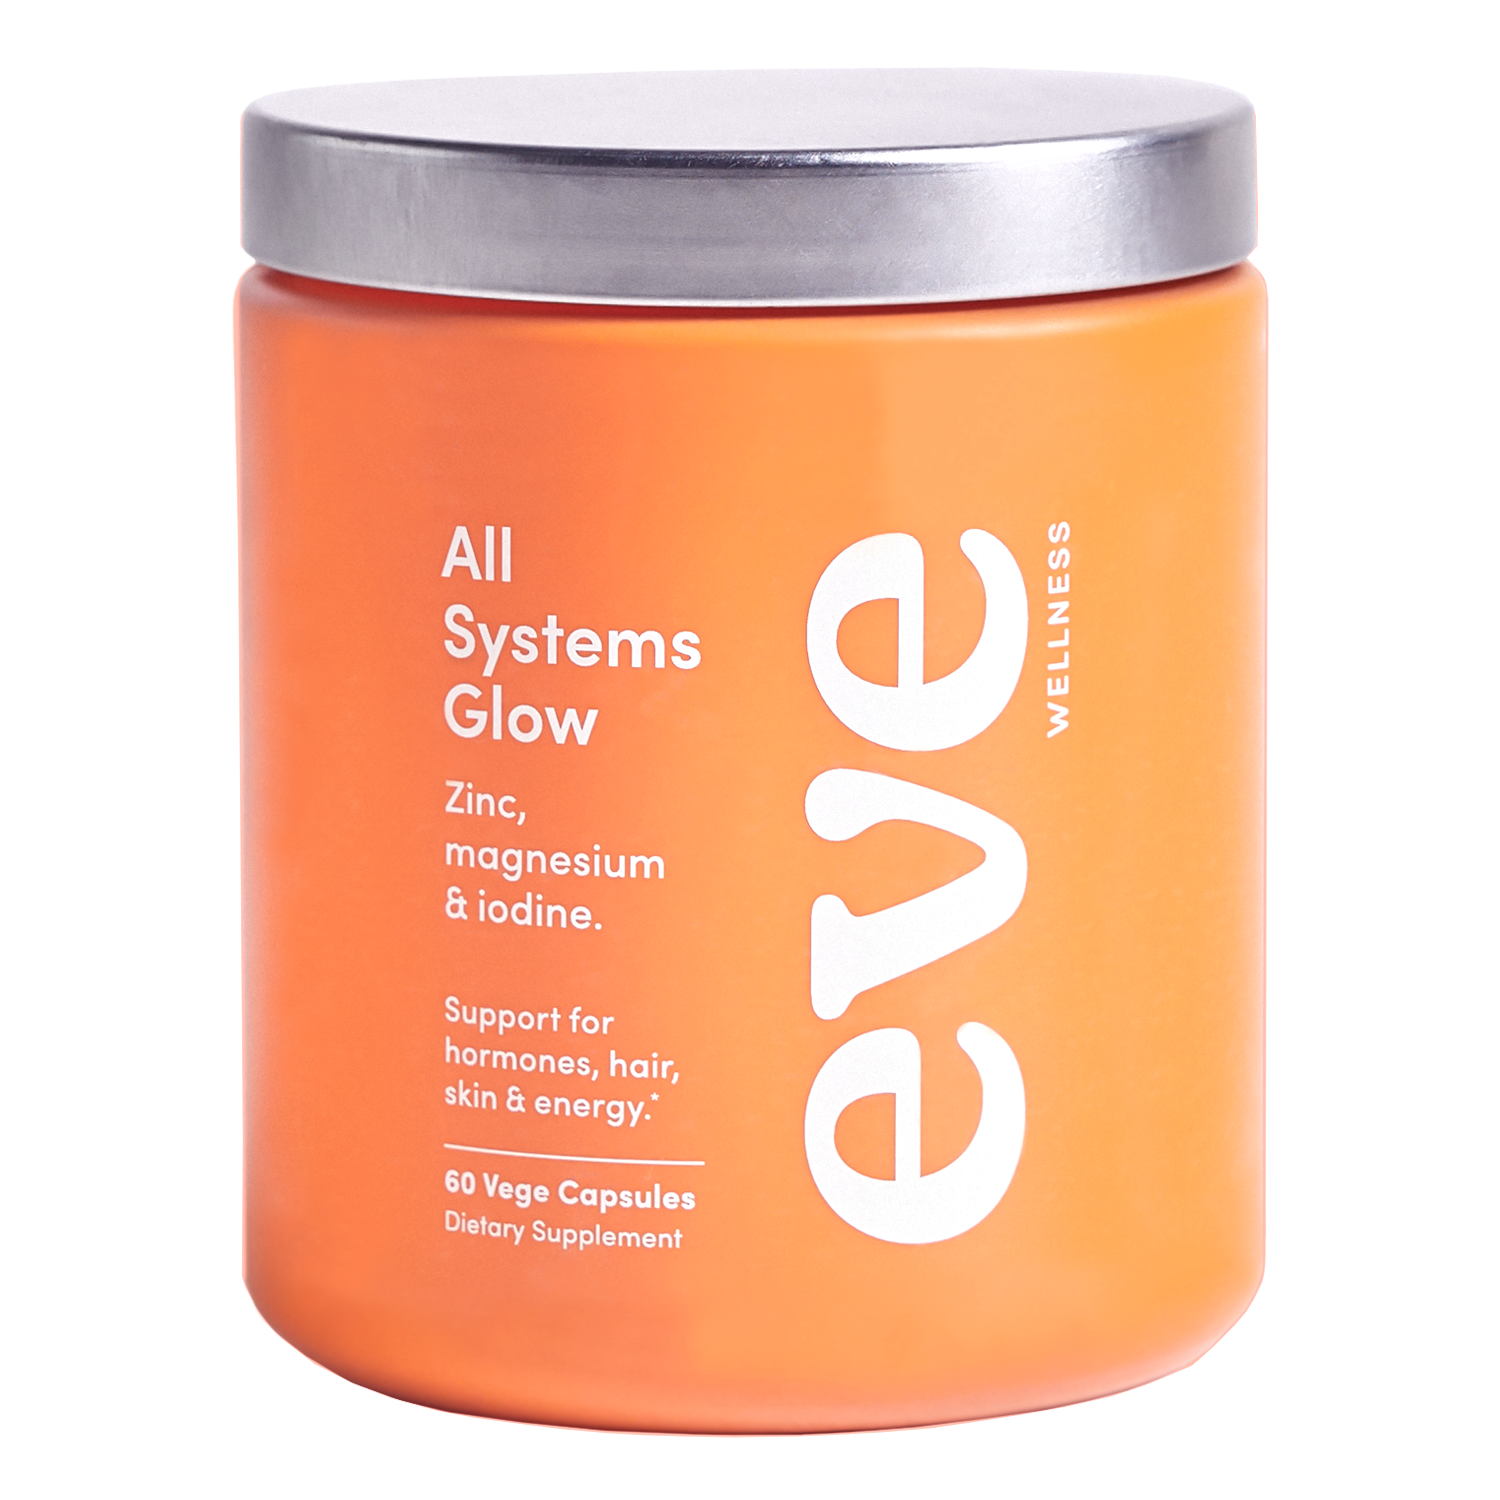 Eve - All Systems Glow 60 Vegetable Capsules